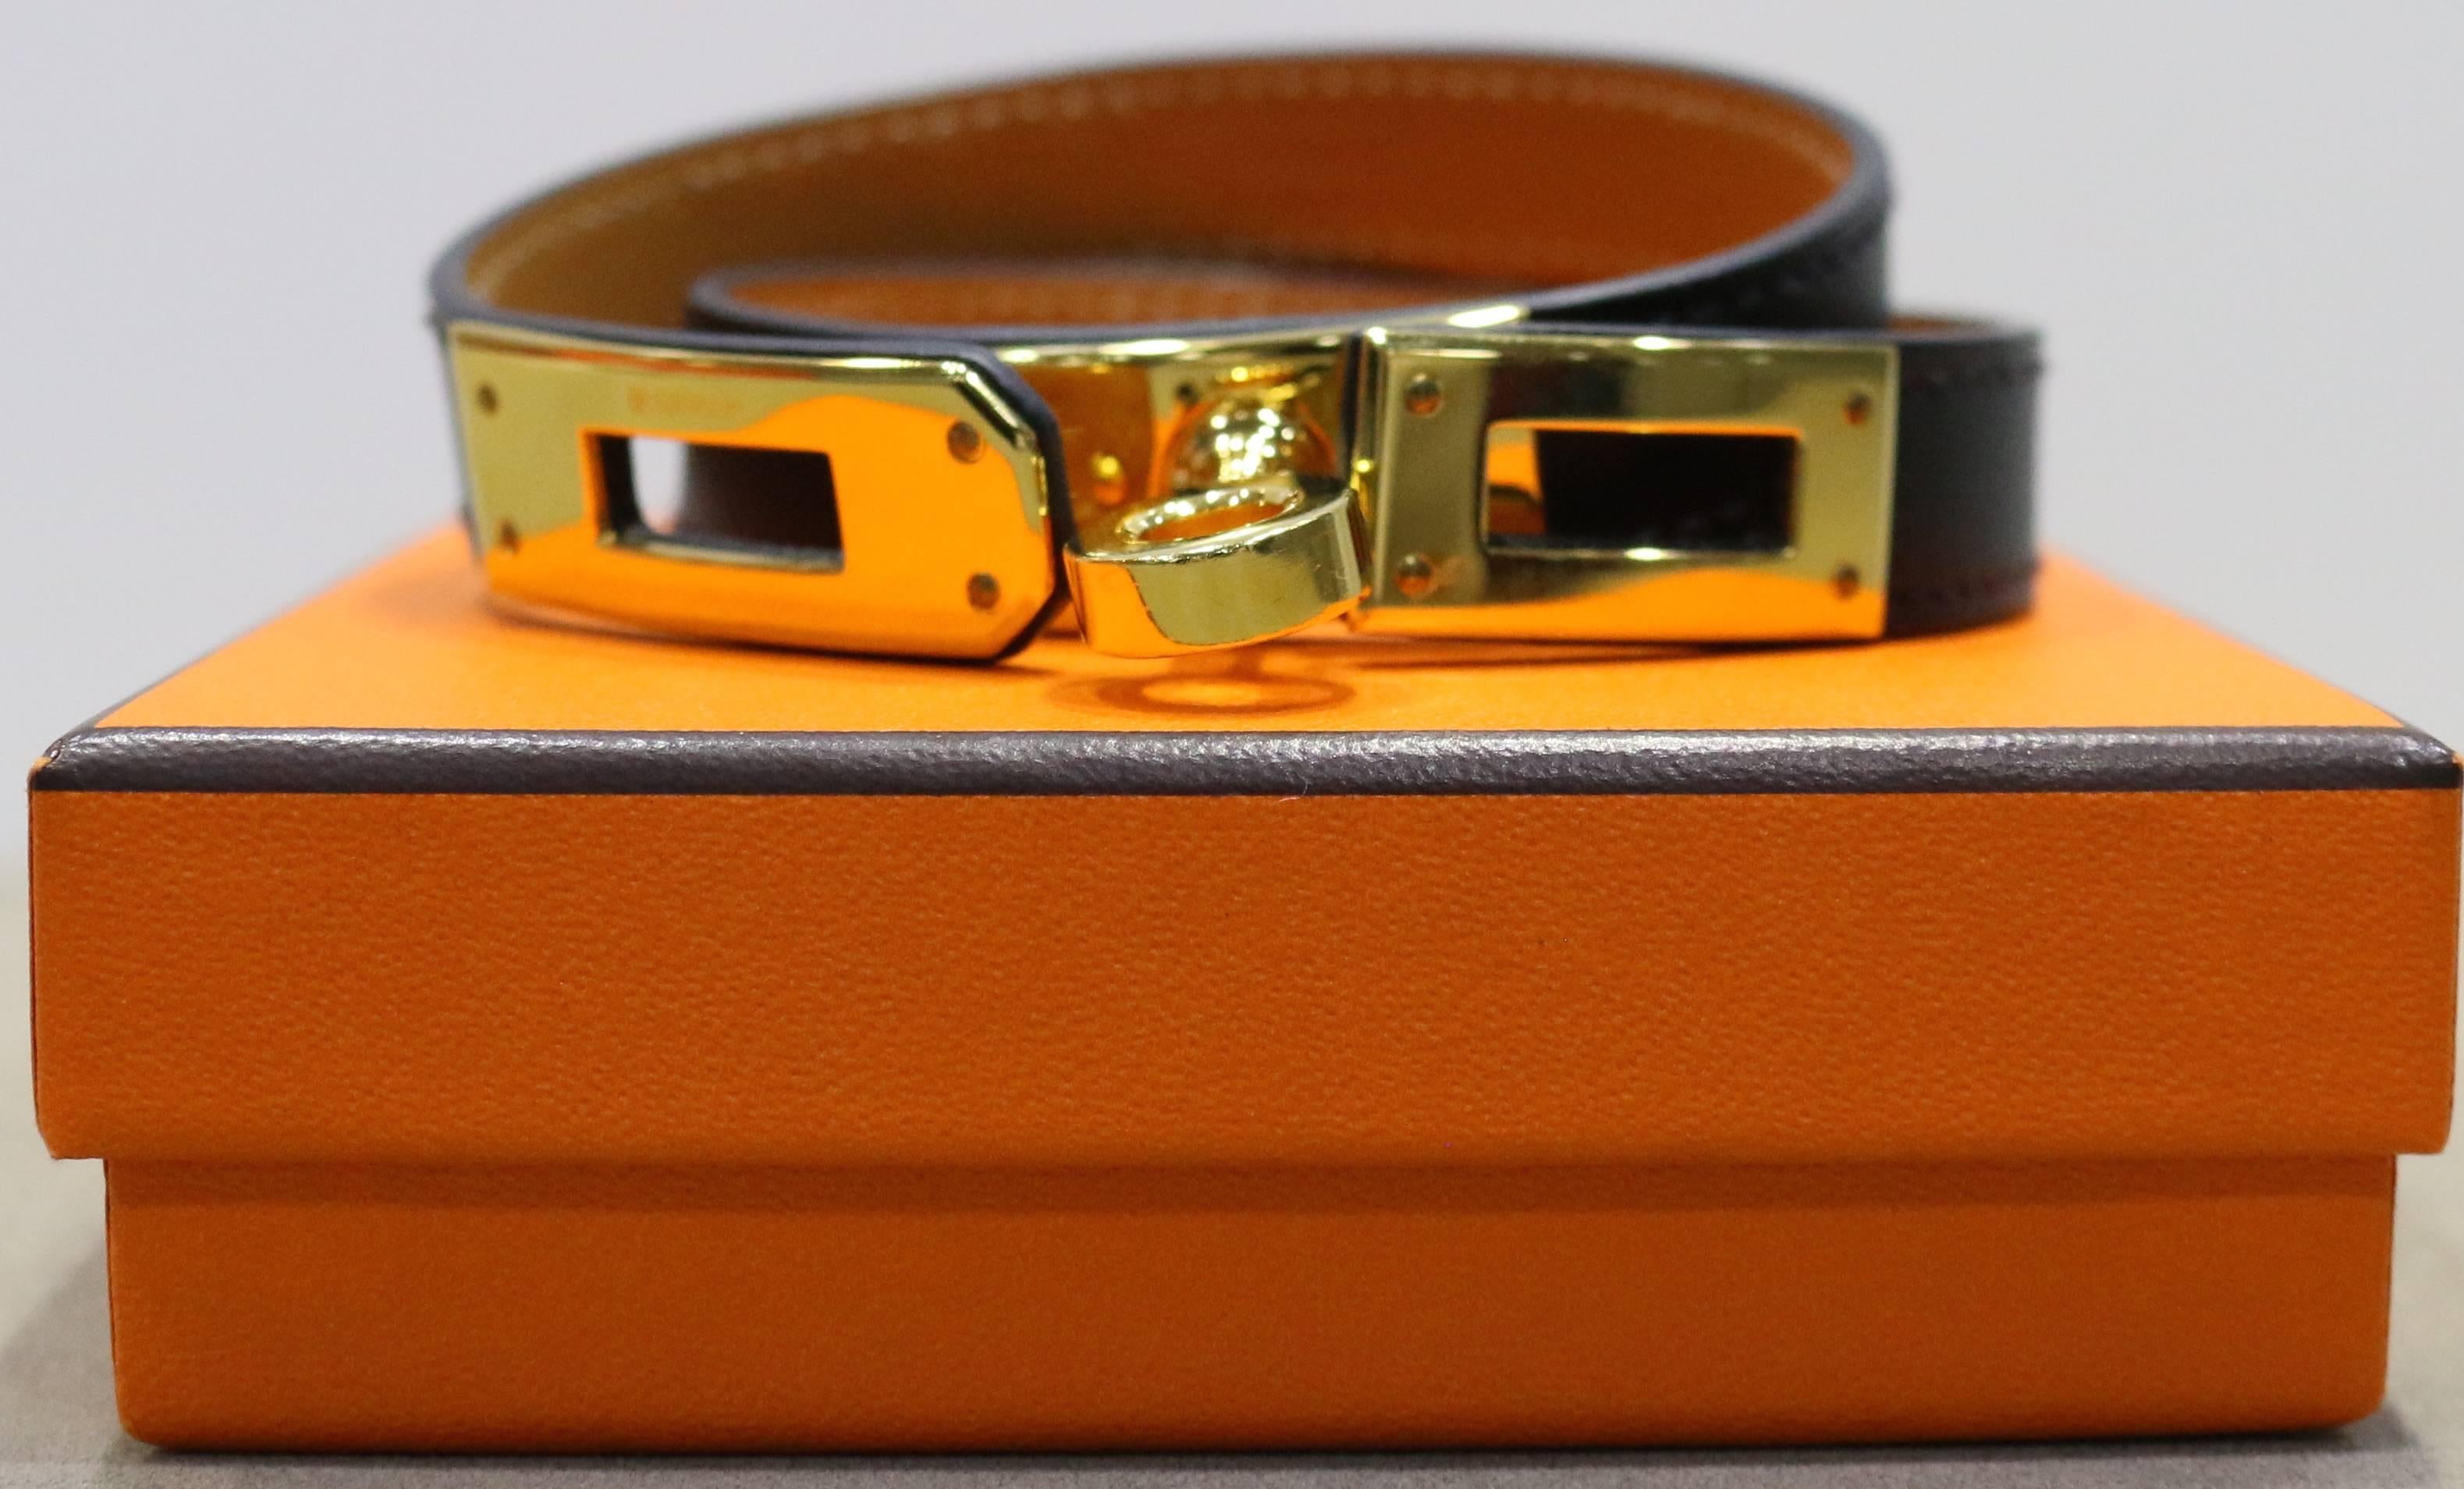 - Authentic and brand new  Hermes black Kelly double tour leather bracelet in gold toned hardware. It is a classic leather bracelet with a sense of chicness! 

- Made in France. 

- Measurement: 37.5 cm 

- It comes with dust bag and original box. 

